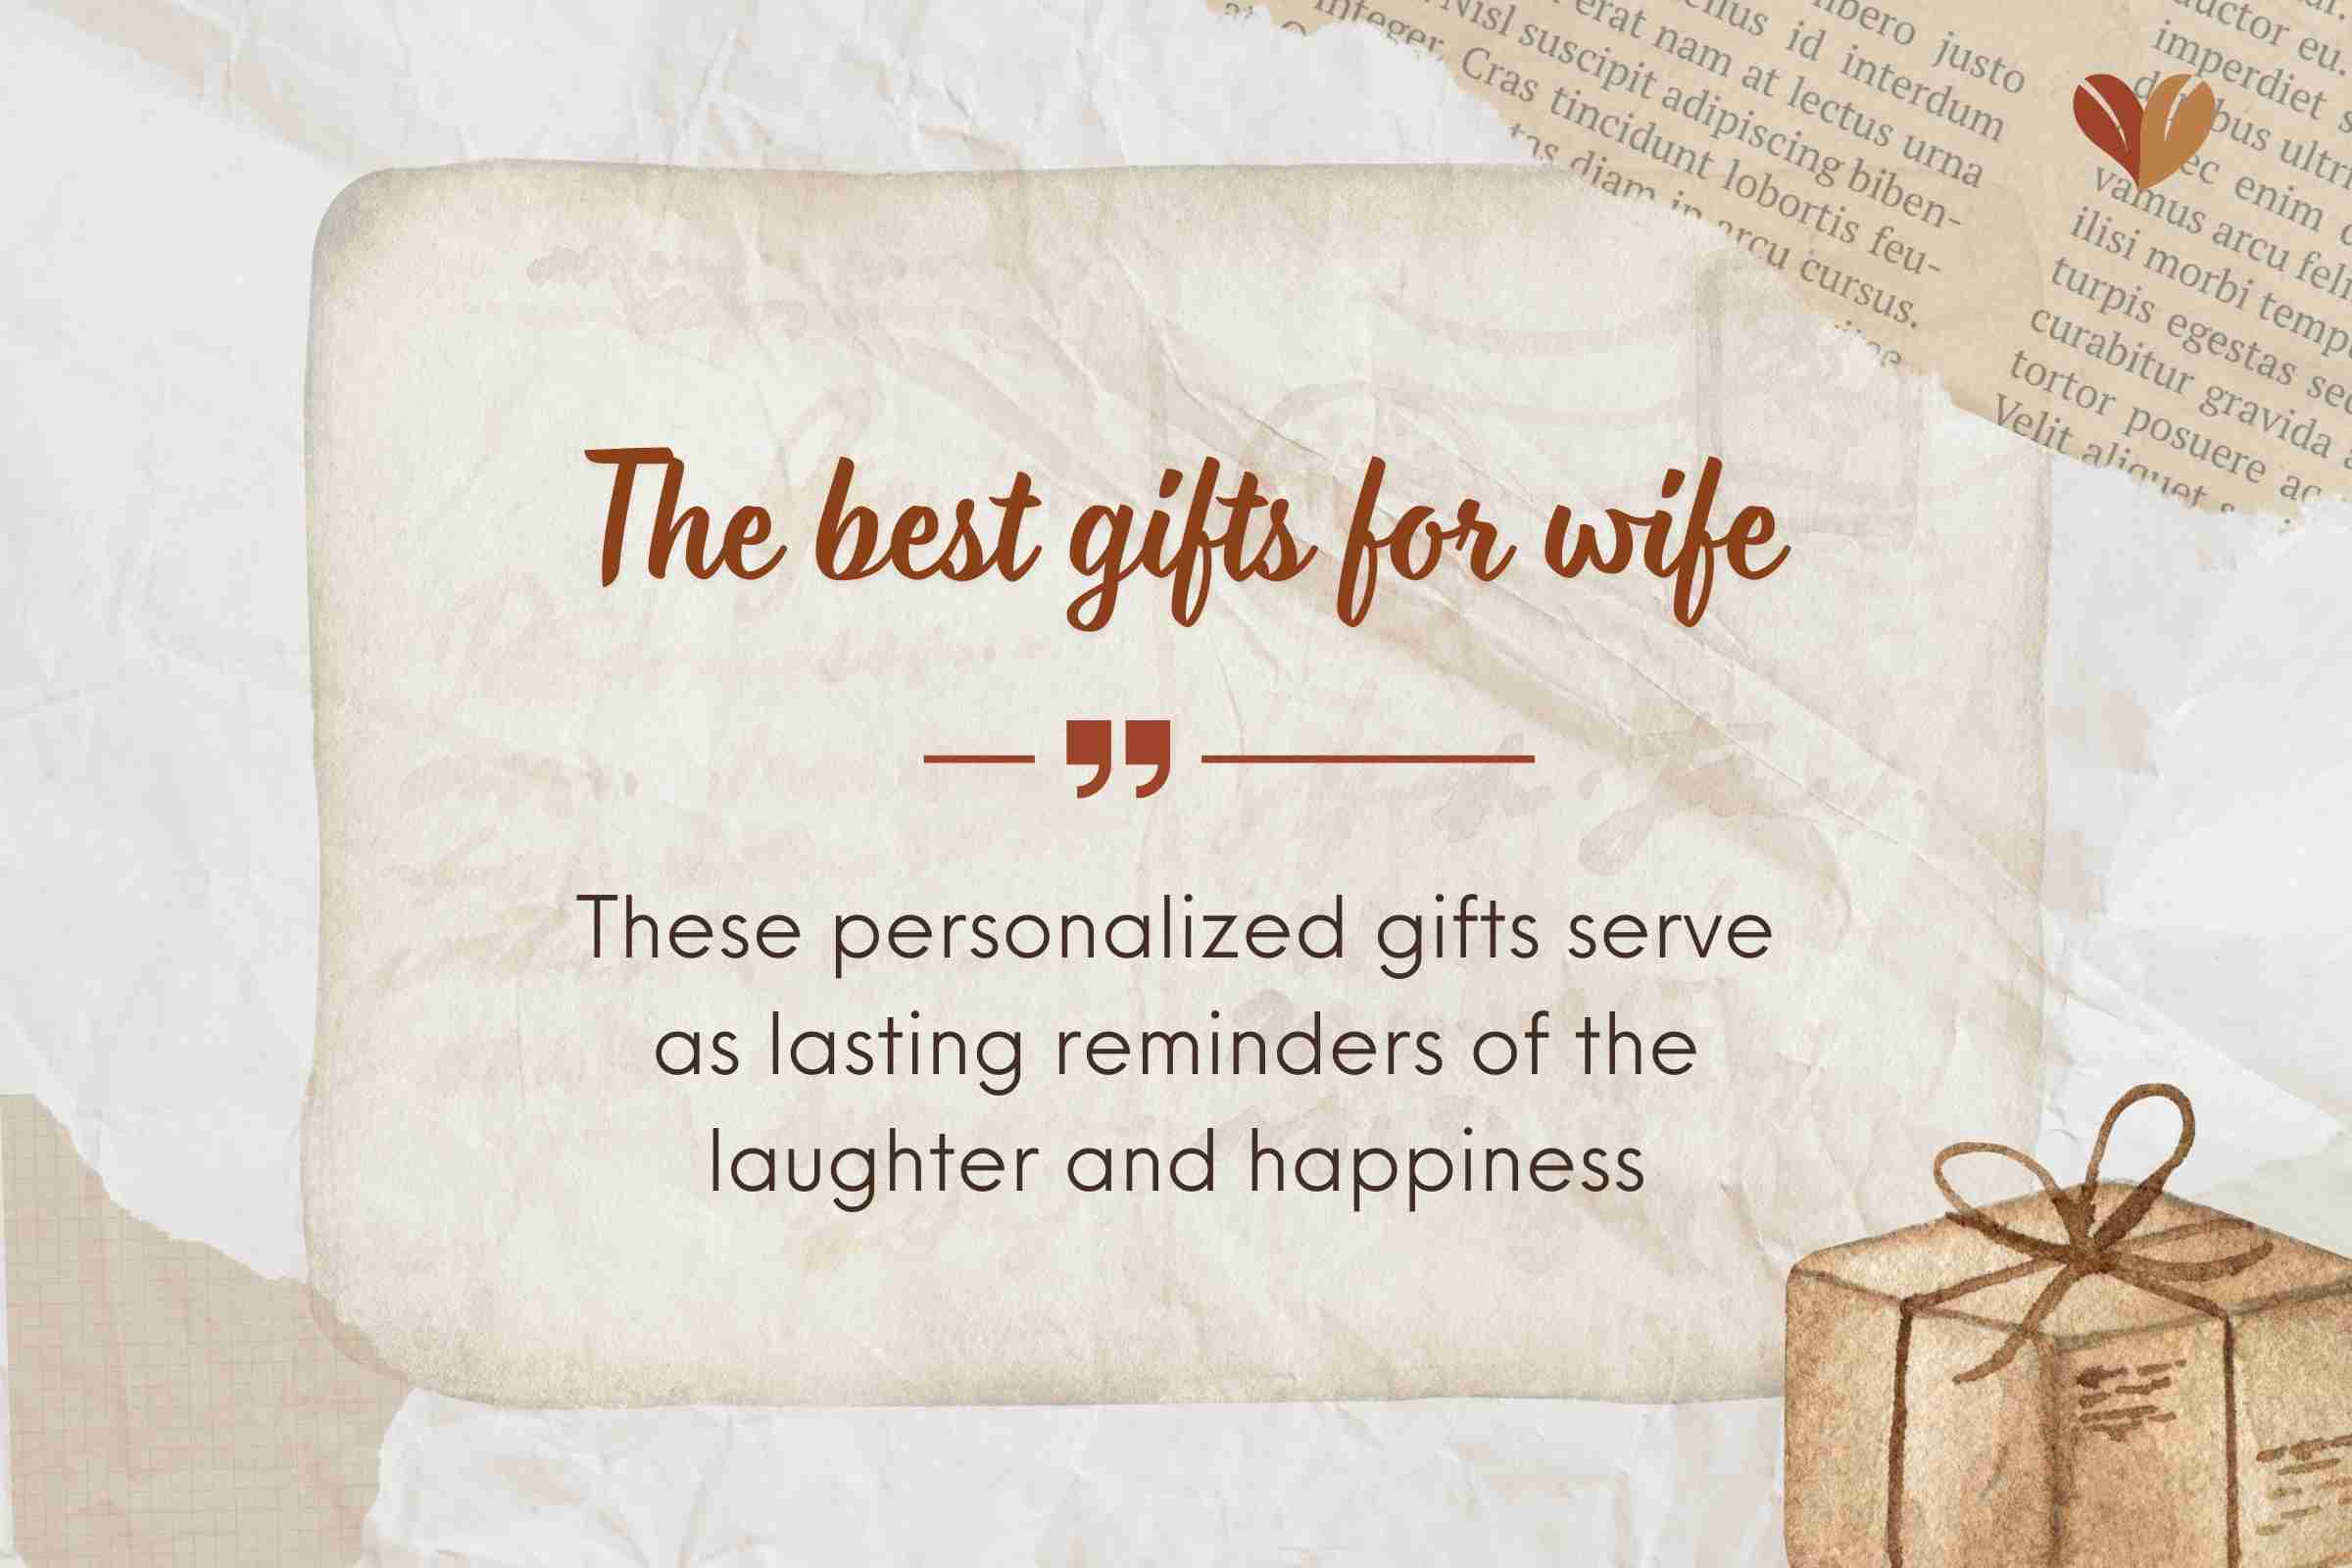 My Mindful Gifts is the best place to look for the best gifts for wife